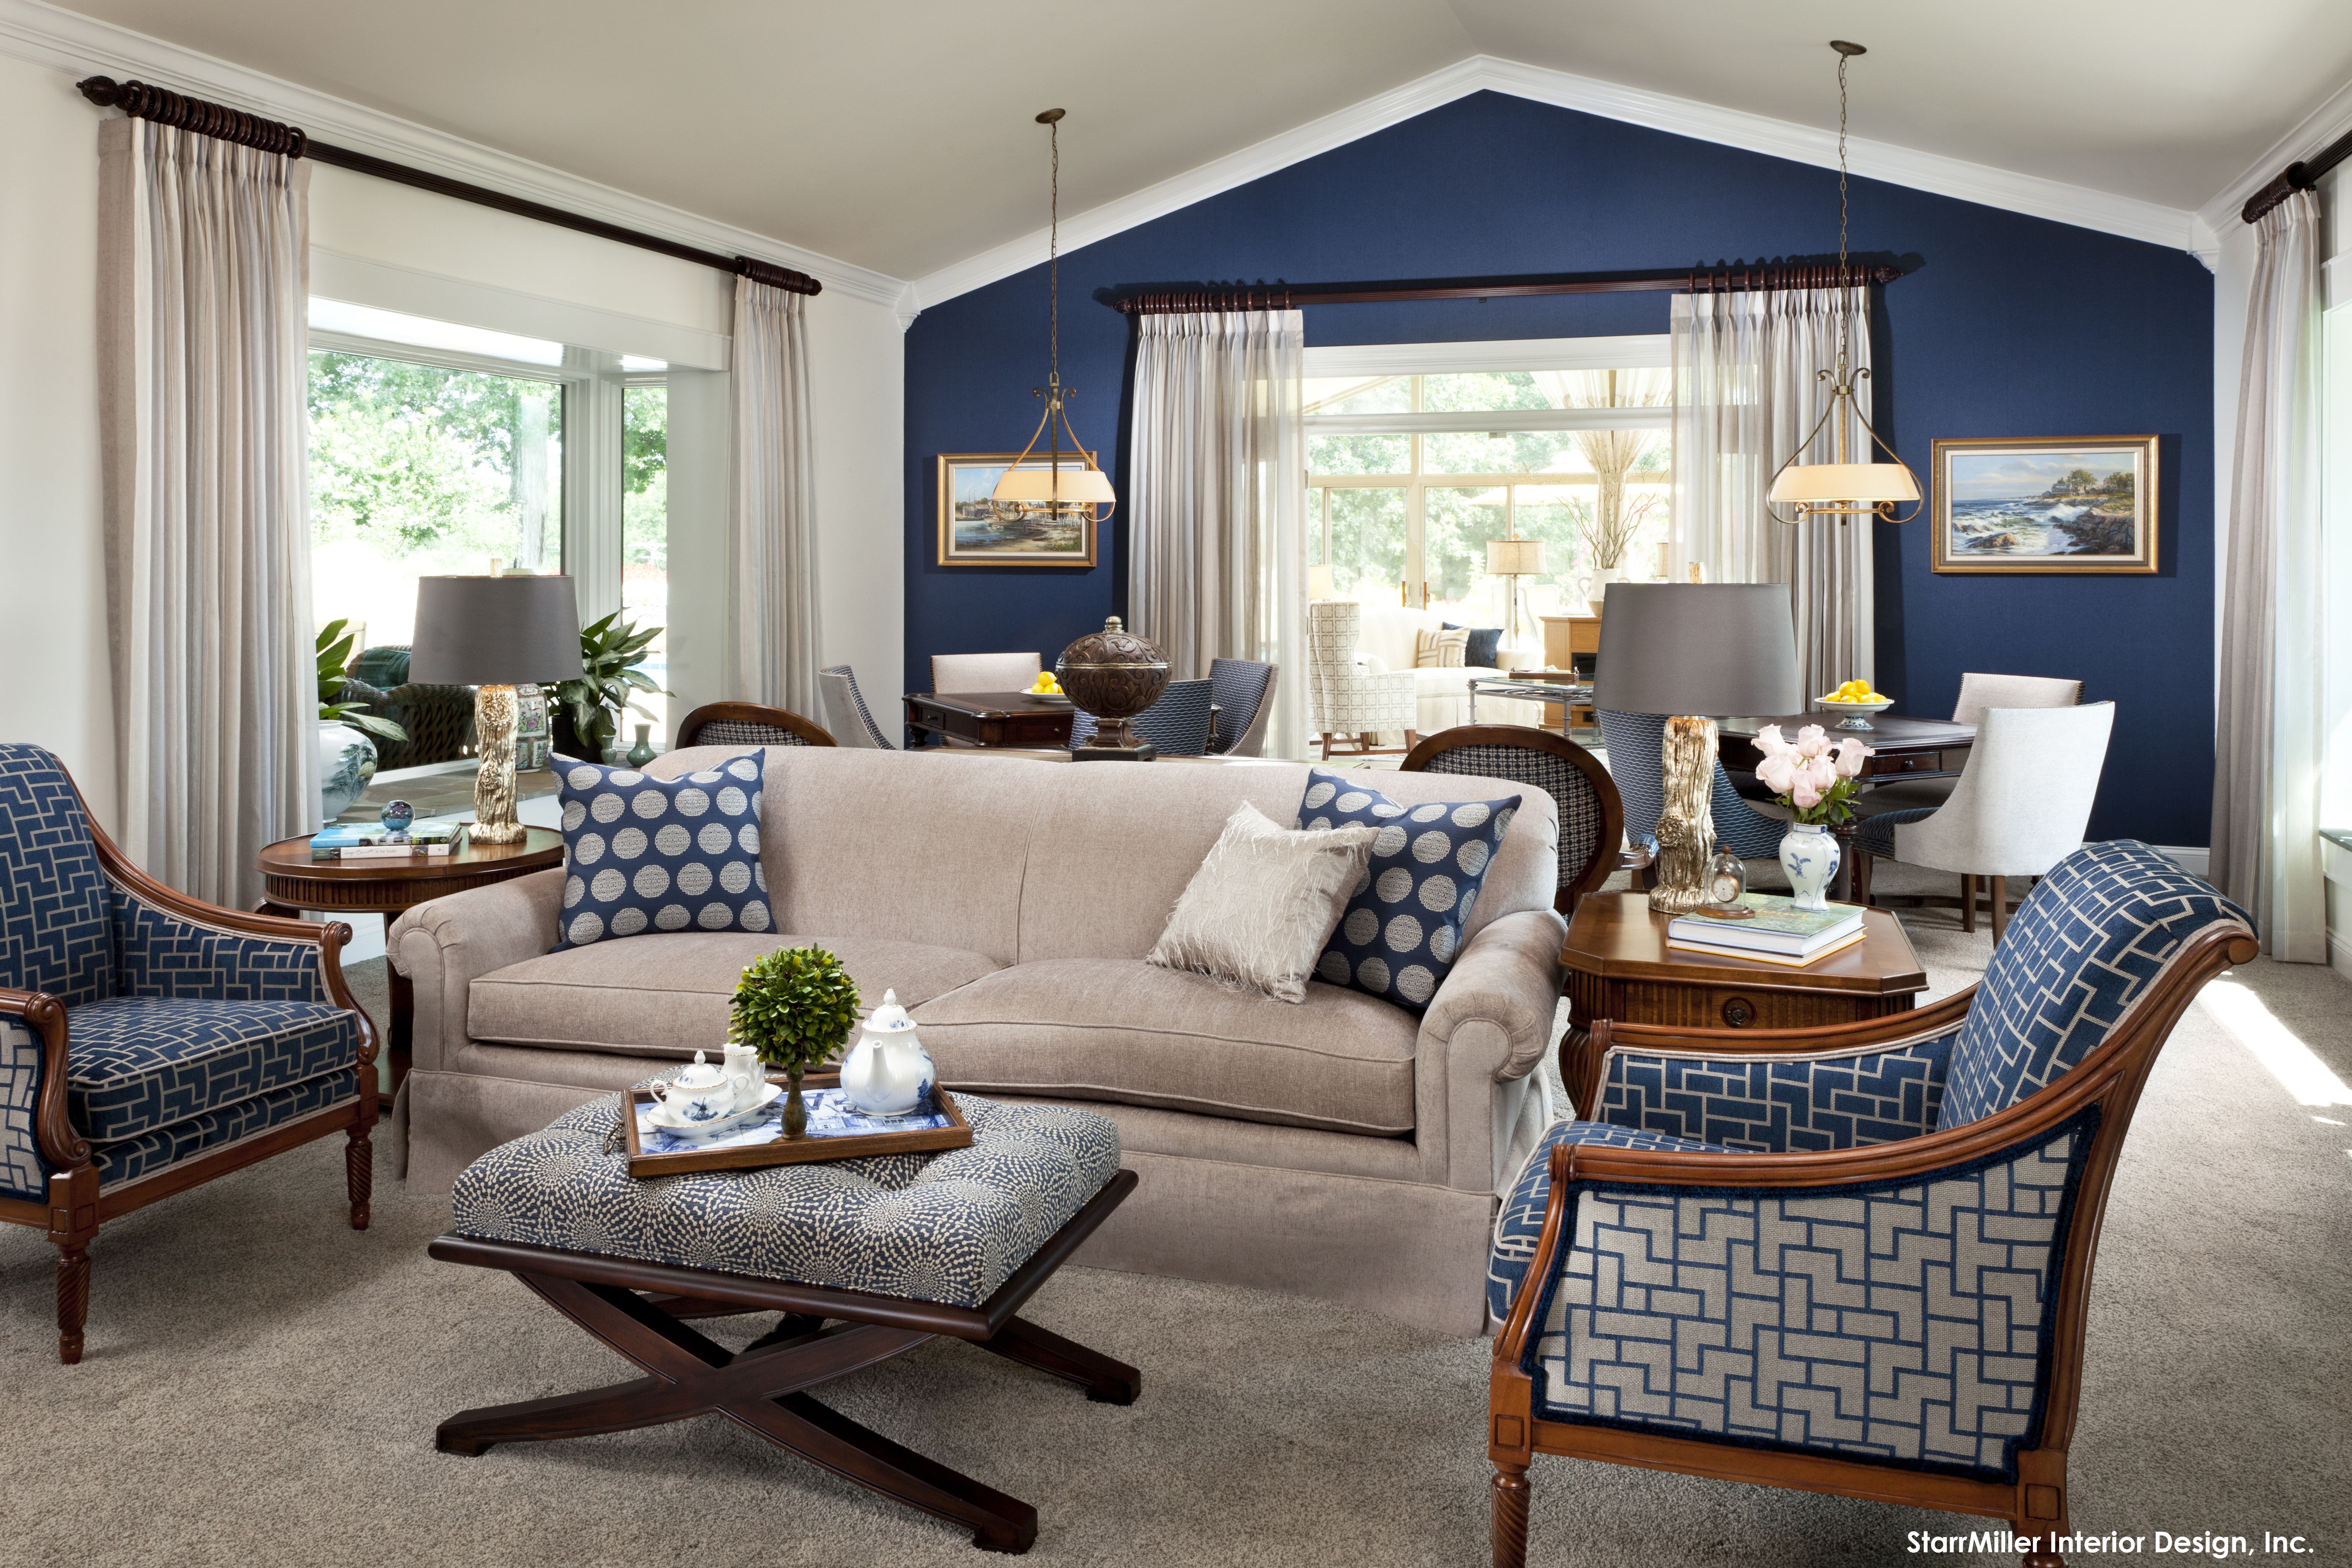 Blue Living Room Ideas 15 Beautiful Living Room Designs With Blue Accents |  Lovers of home design OCQWDMW